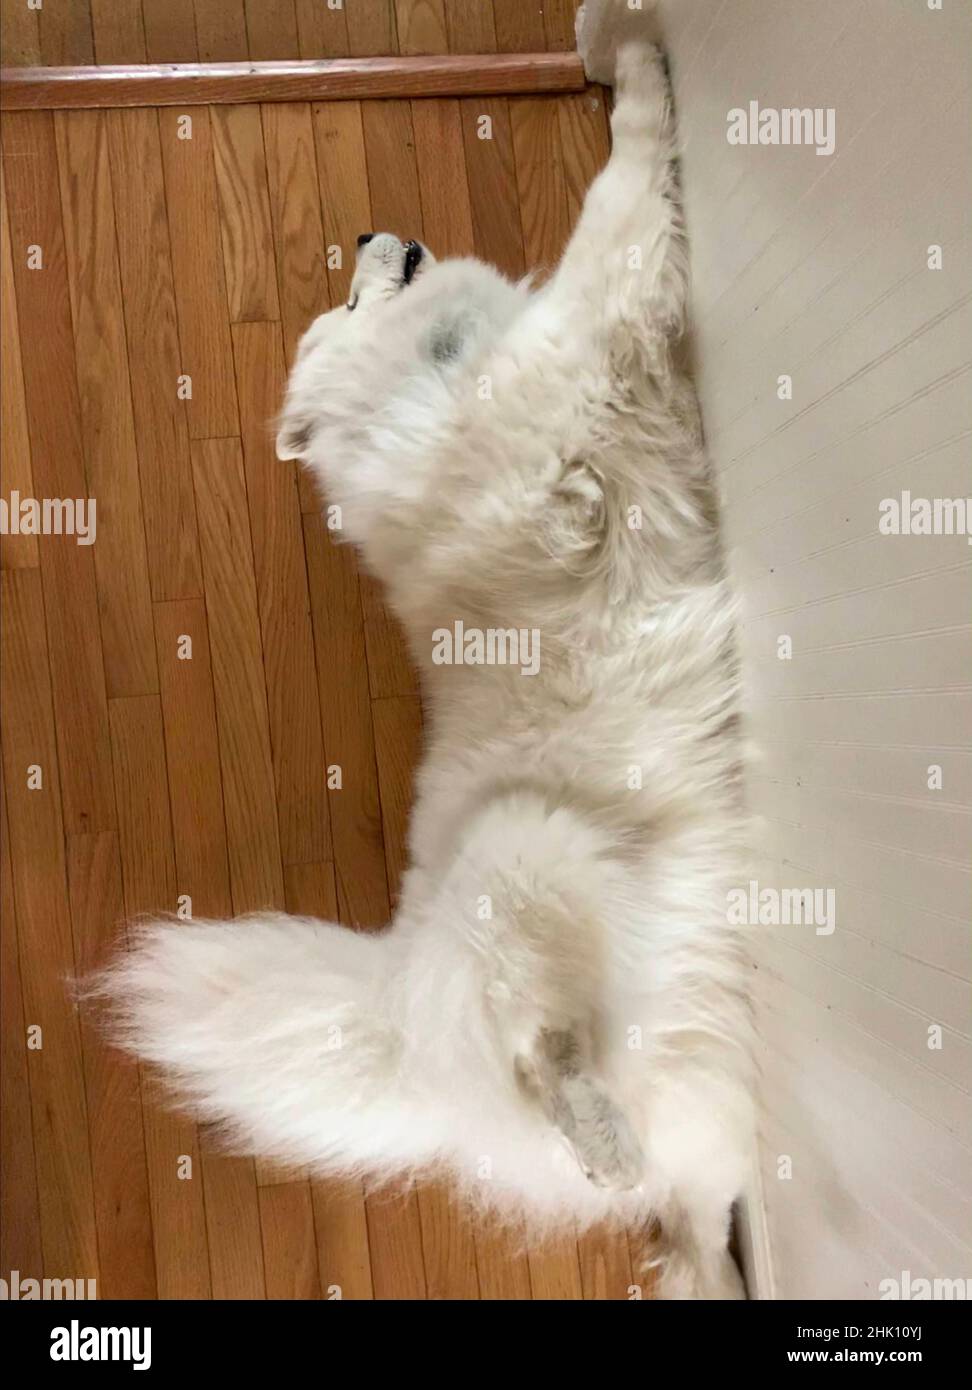 cute samoyed dog stretched out Stock Photo